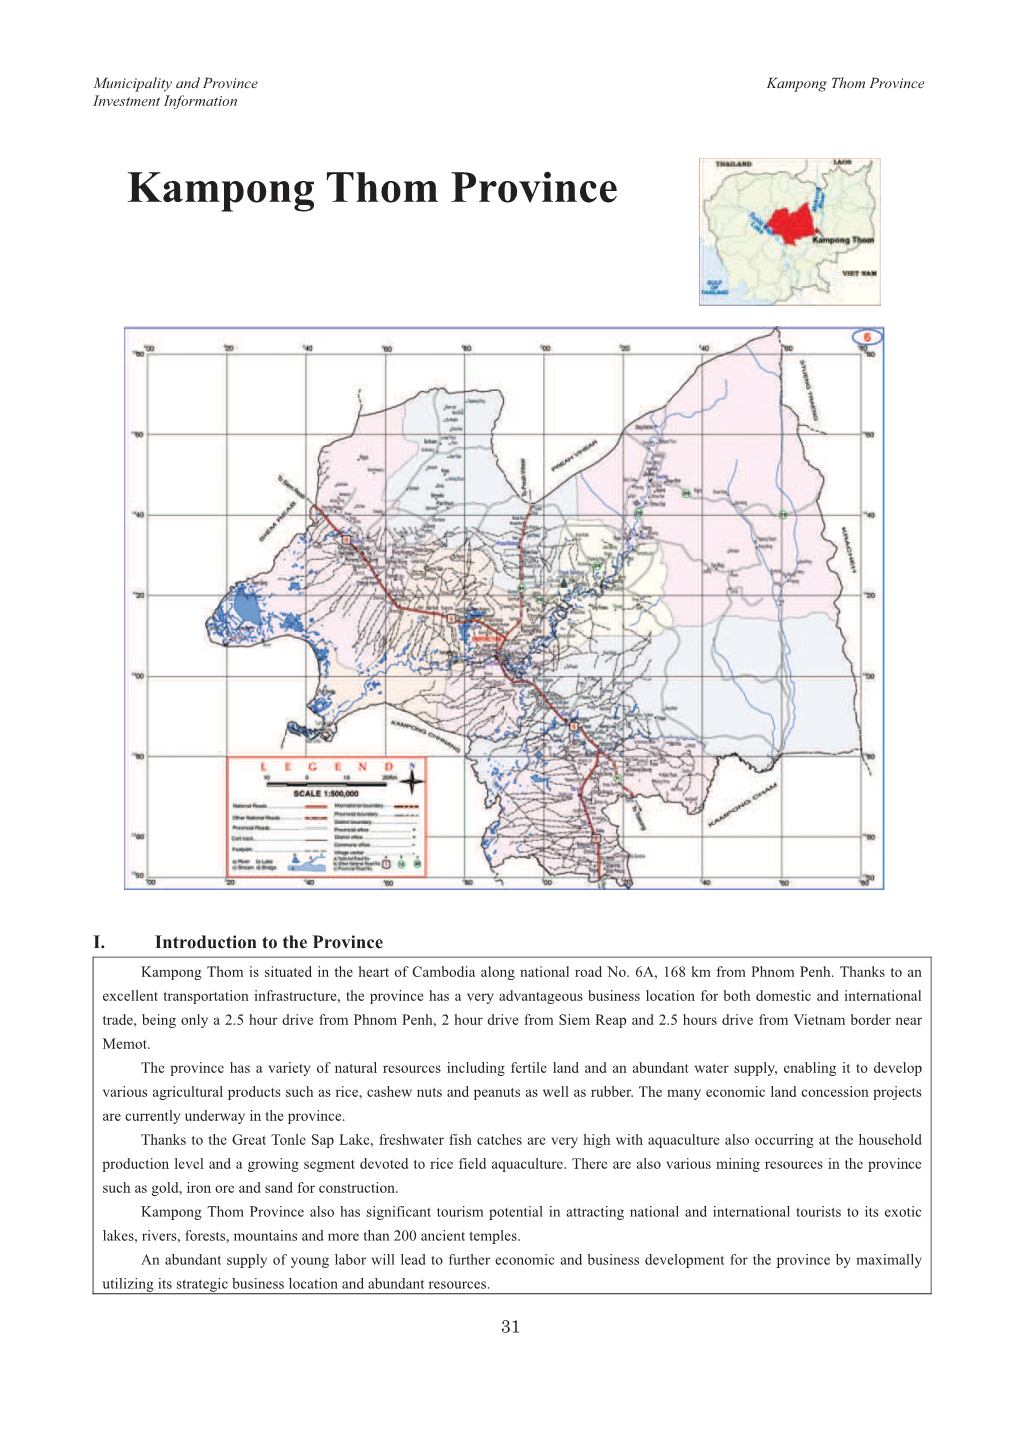 Kampong Thom Province Investment Information